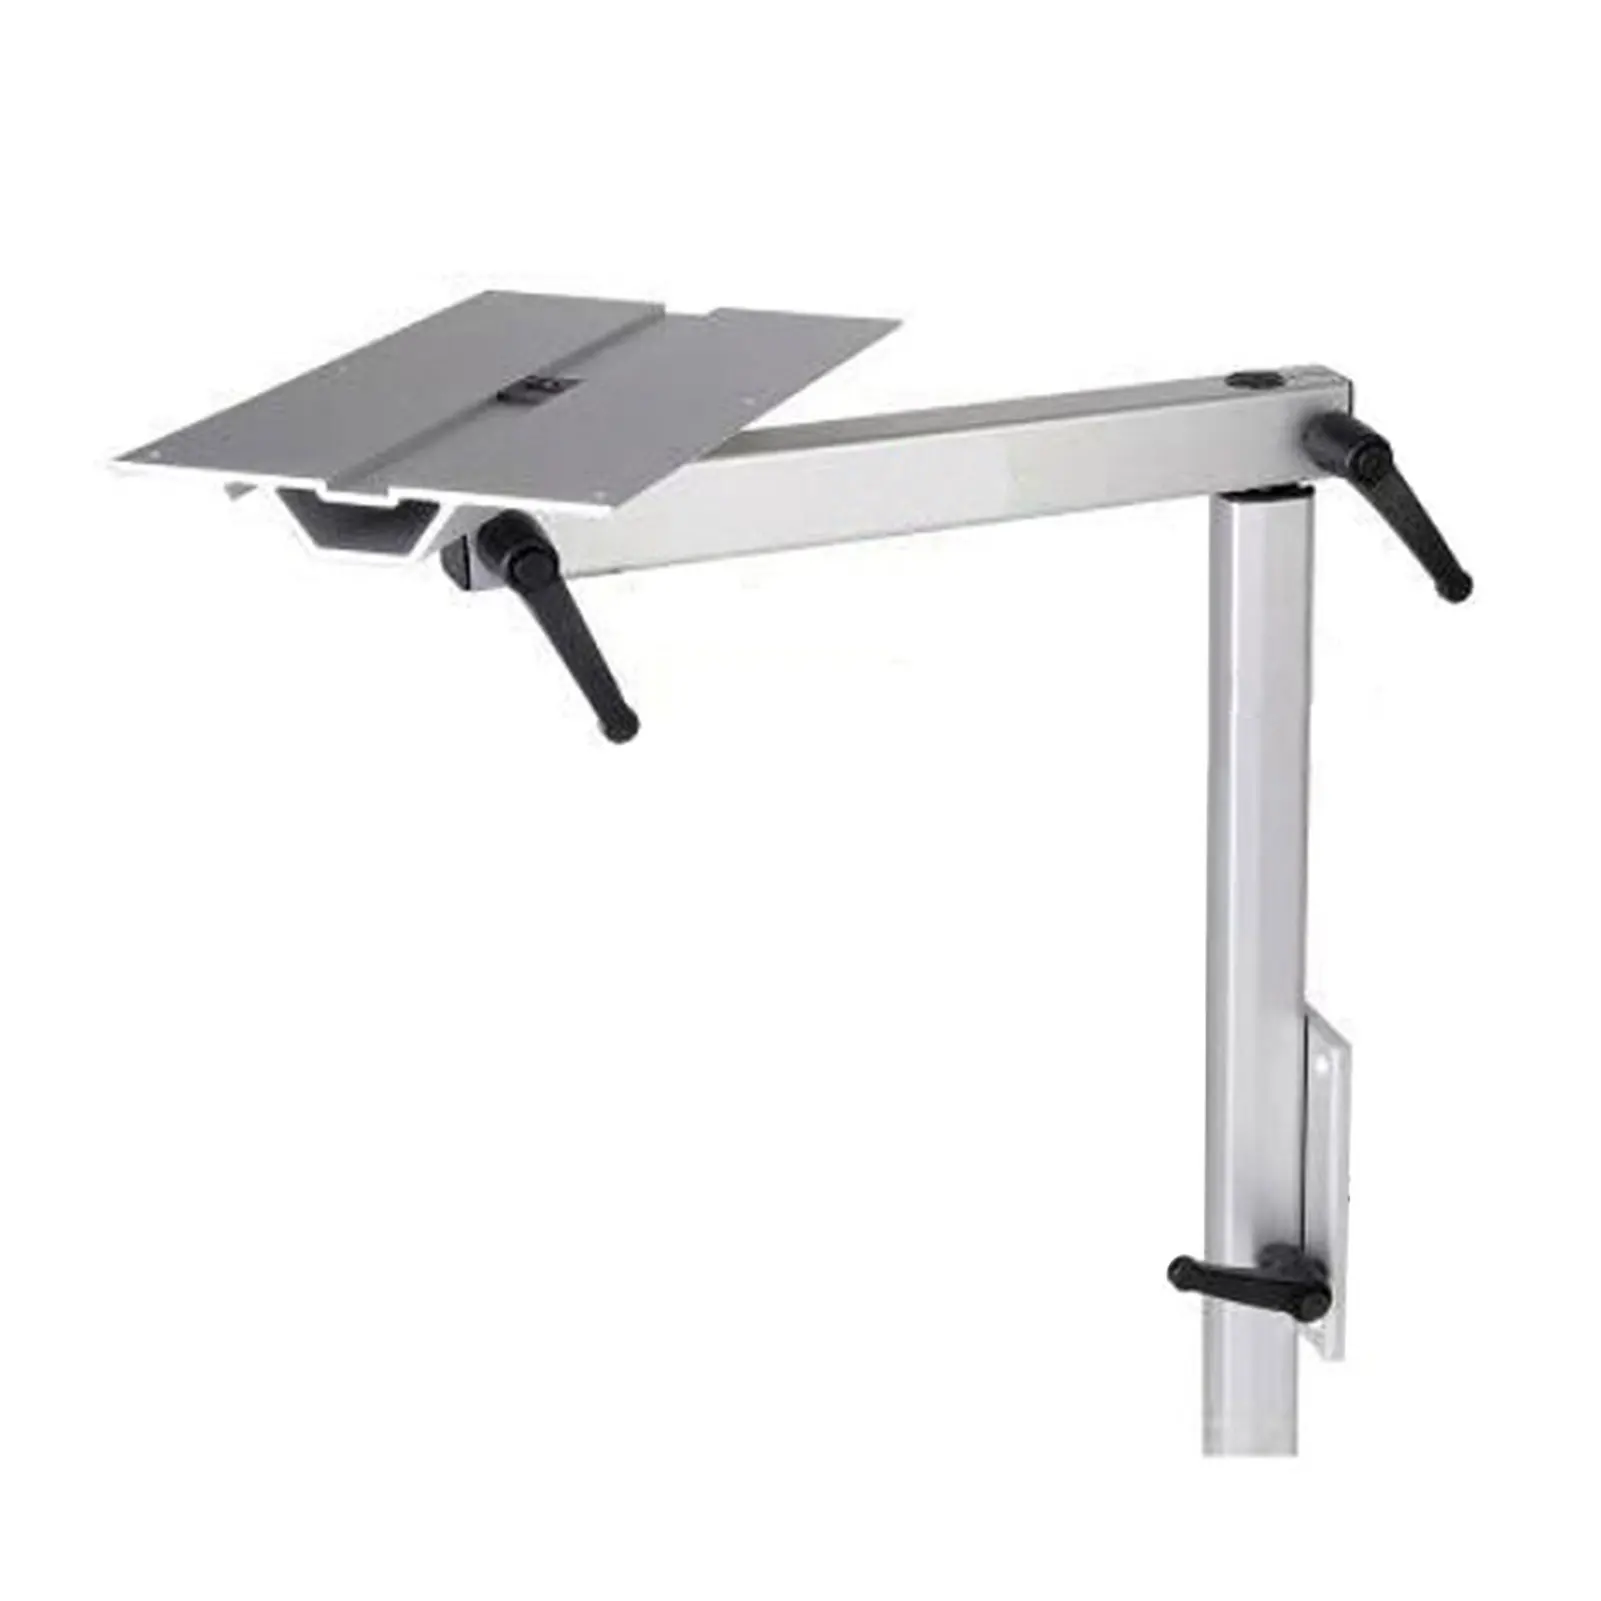 

Adjustable Removable RV Table Legs Aluminum Alloy Adjustable Height 360 Degree Rotation Holder Stand Detachable RV Accessories F